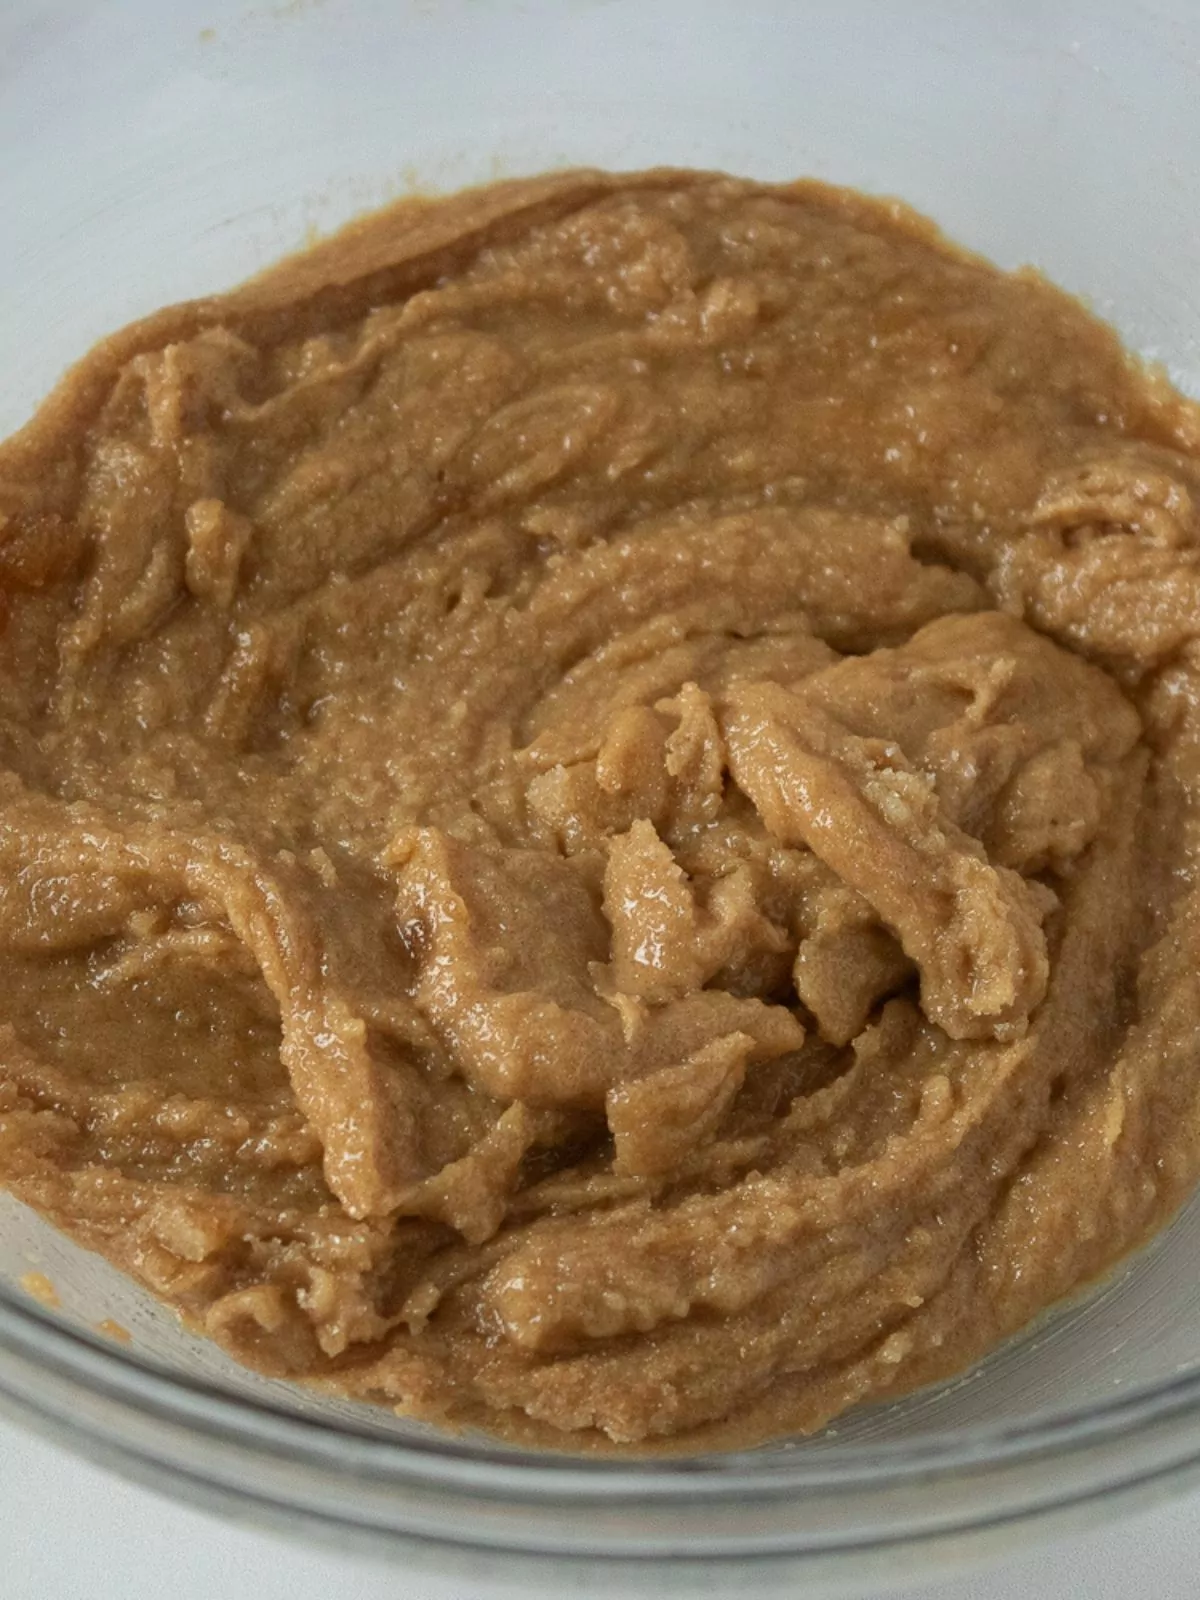 Peanut butter mixture in bowl.